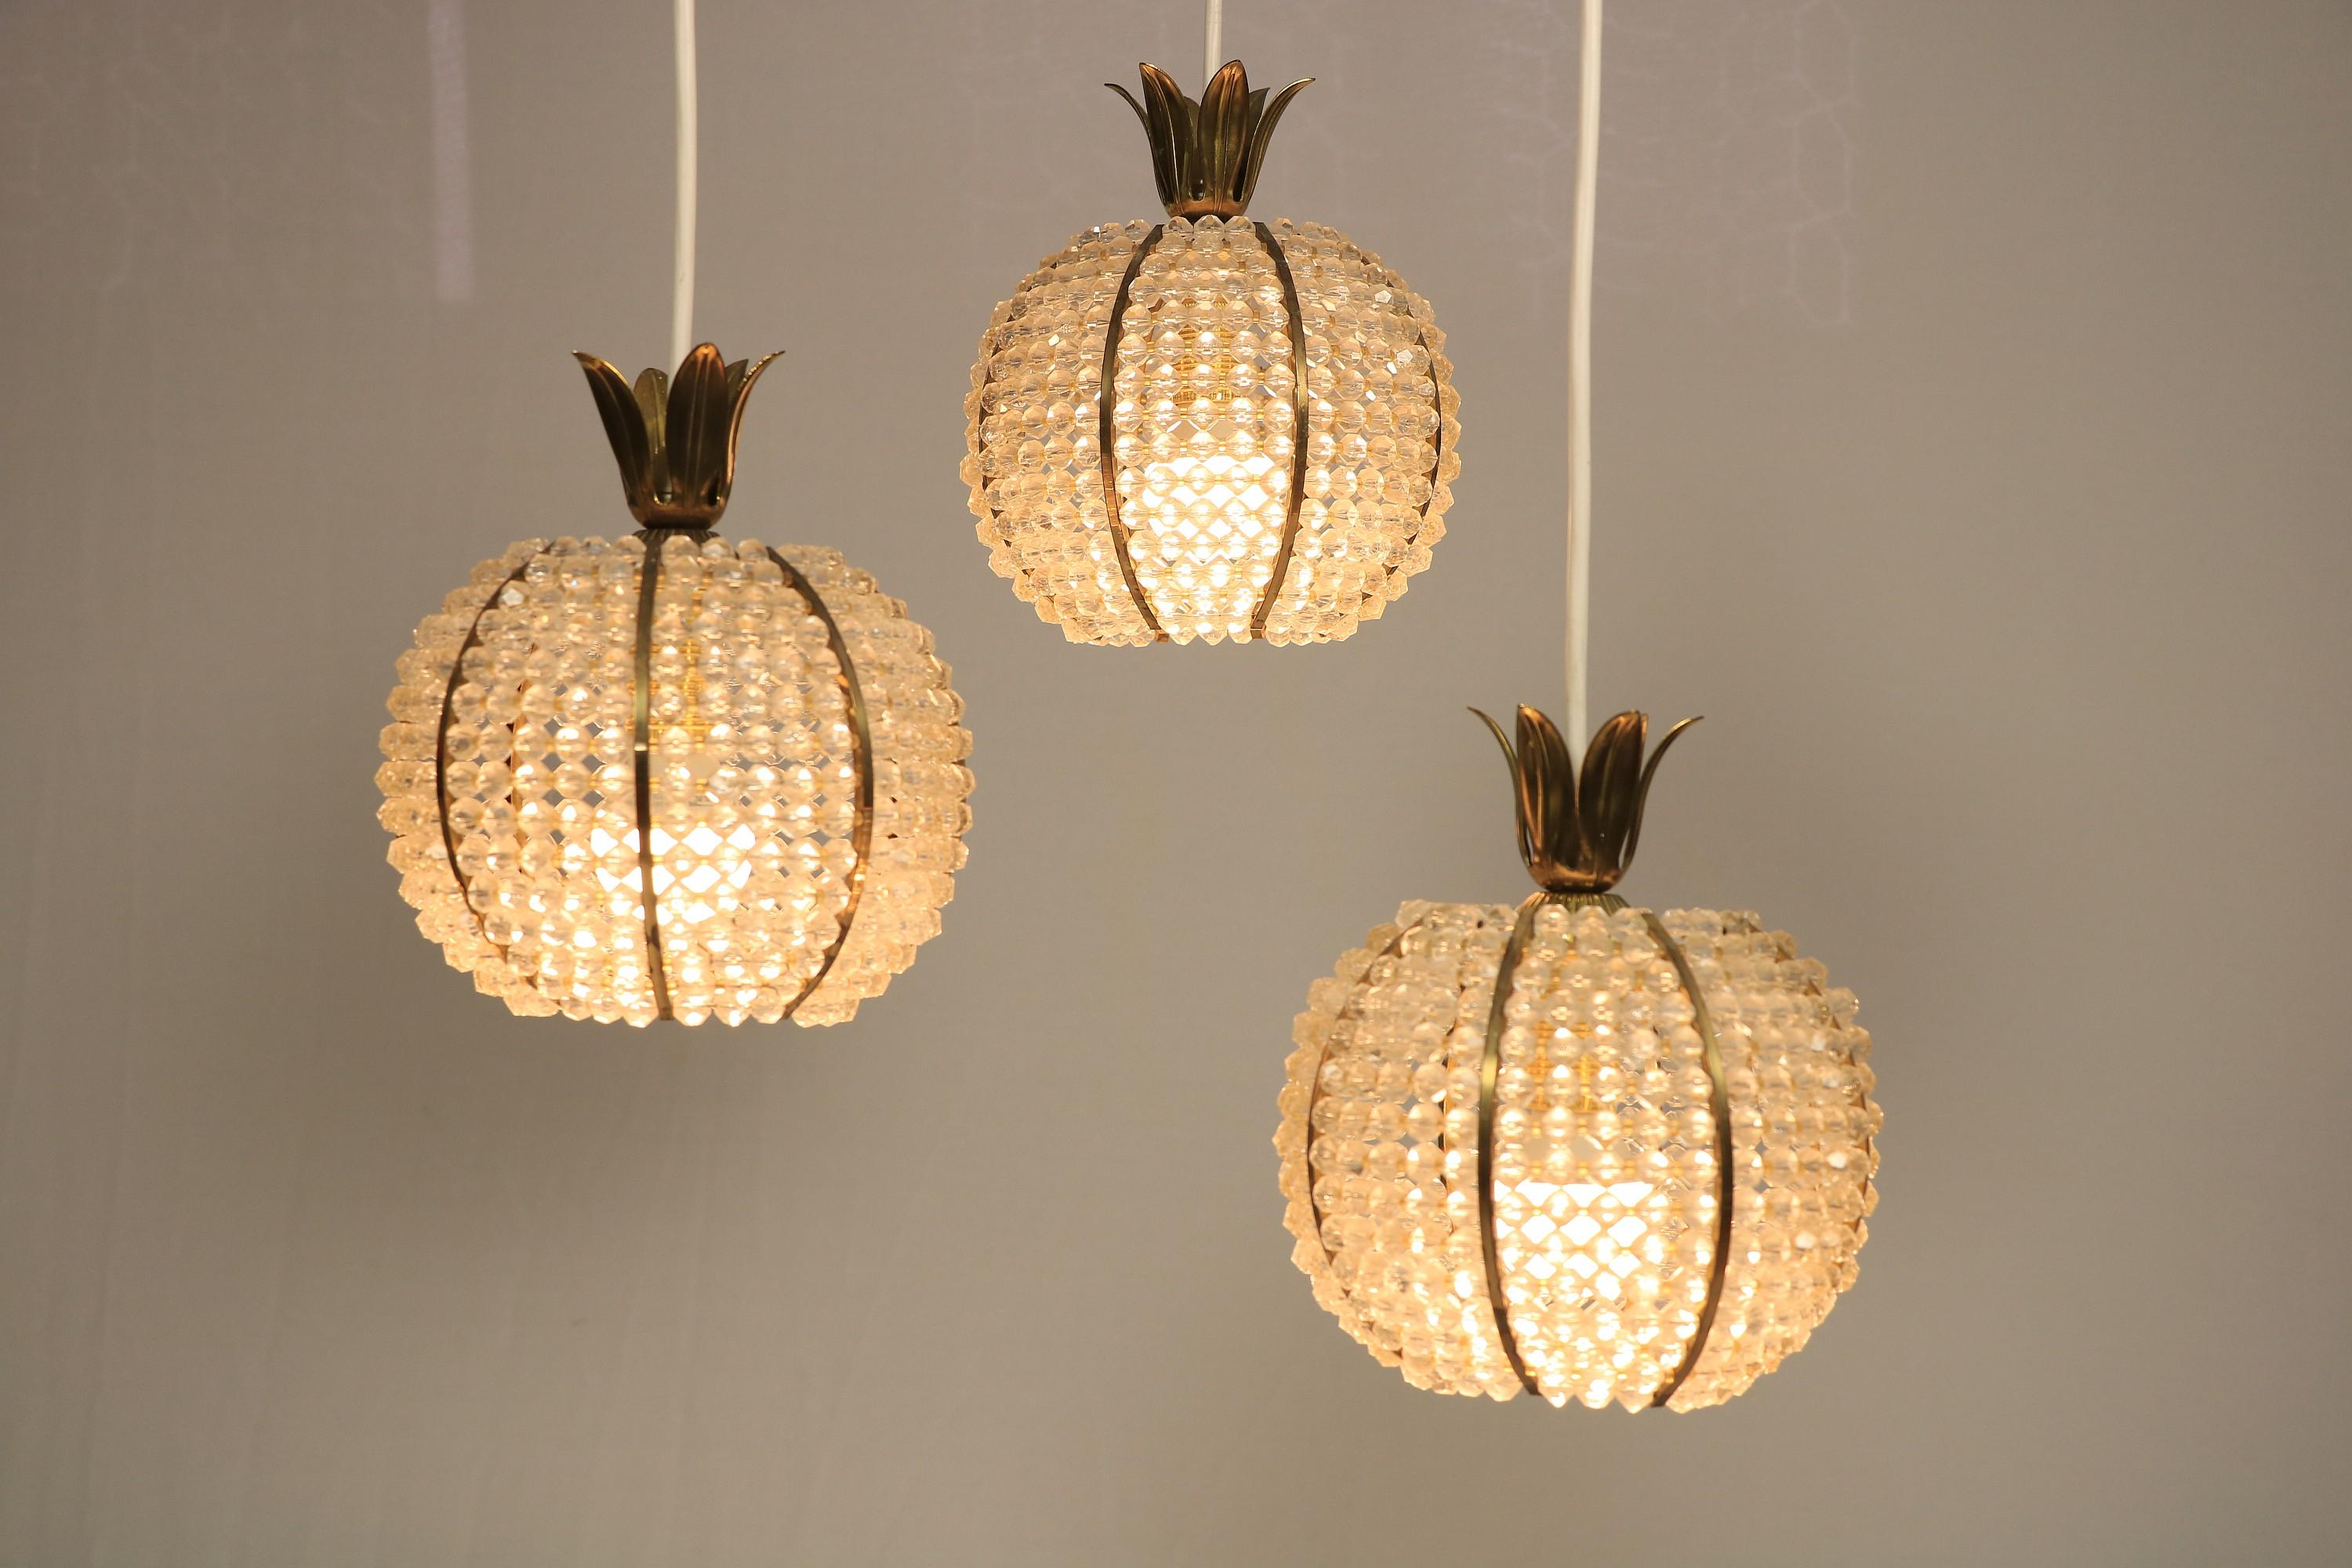 Rare, extraordinary cascade lamp by Emil Stejnar.
Manufacturer: Nikoll, Vienna, Austria.
 
The balls consist of many acrylic beads, with a brass top. Design of a pineapple.
 
The baldachin with manglass beads is also interesting.
 
The lamp has been